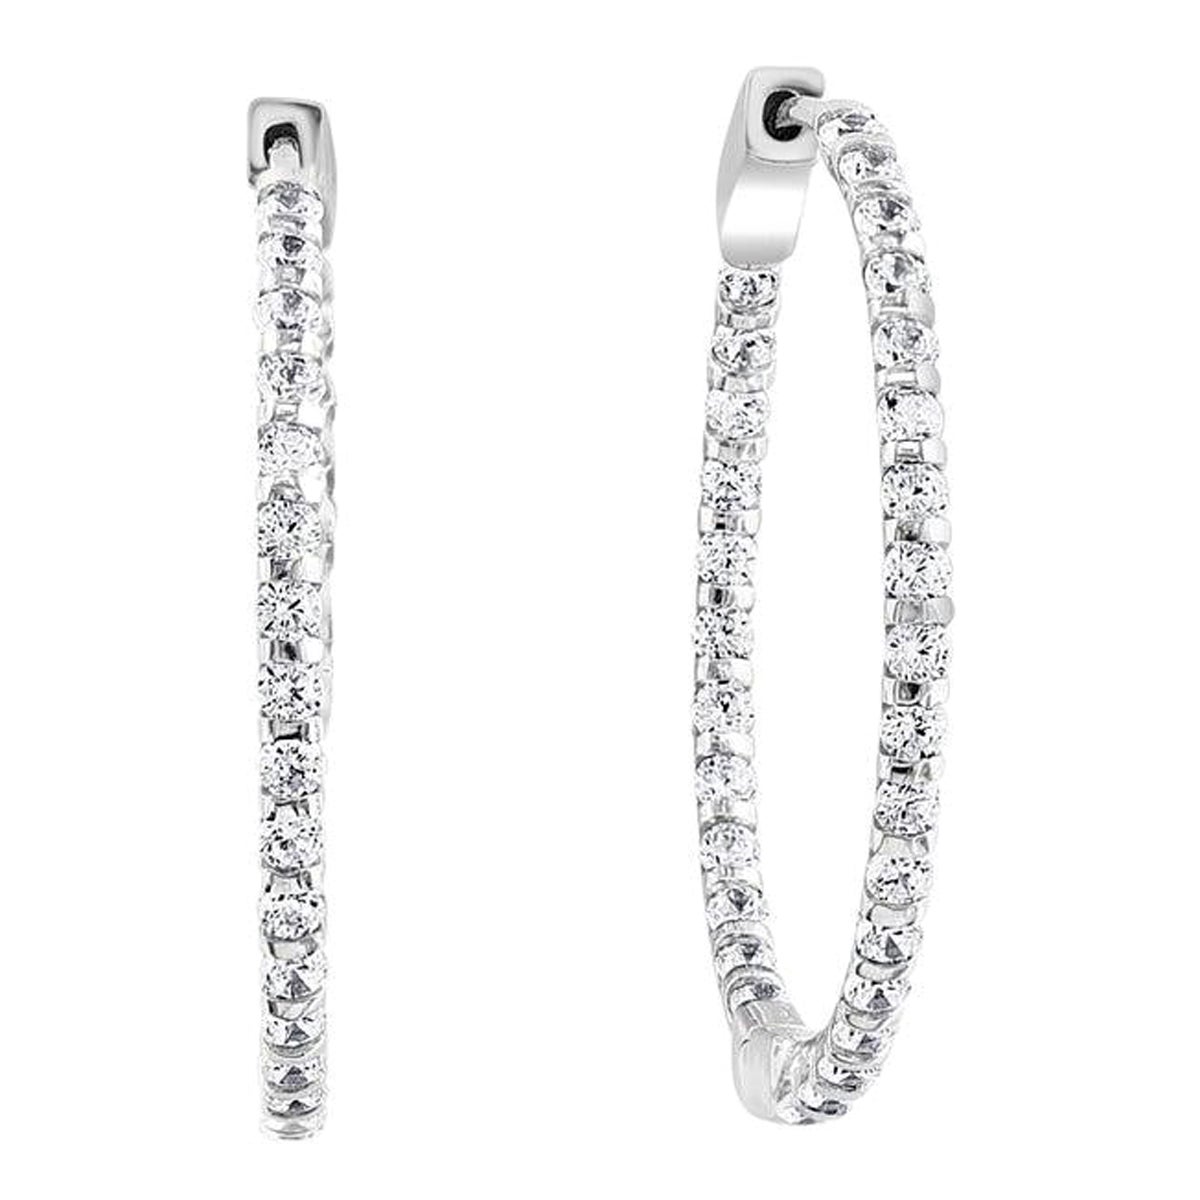 Hot Fashionable Small  1.2 Inch  Sterling Silver & Cubic Zirconia Hoop Earrings For Sale